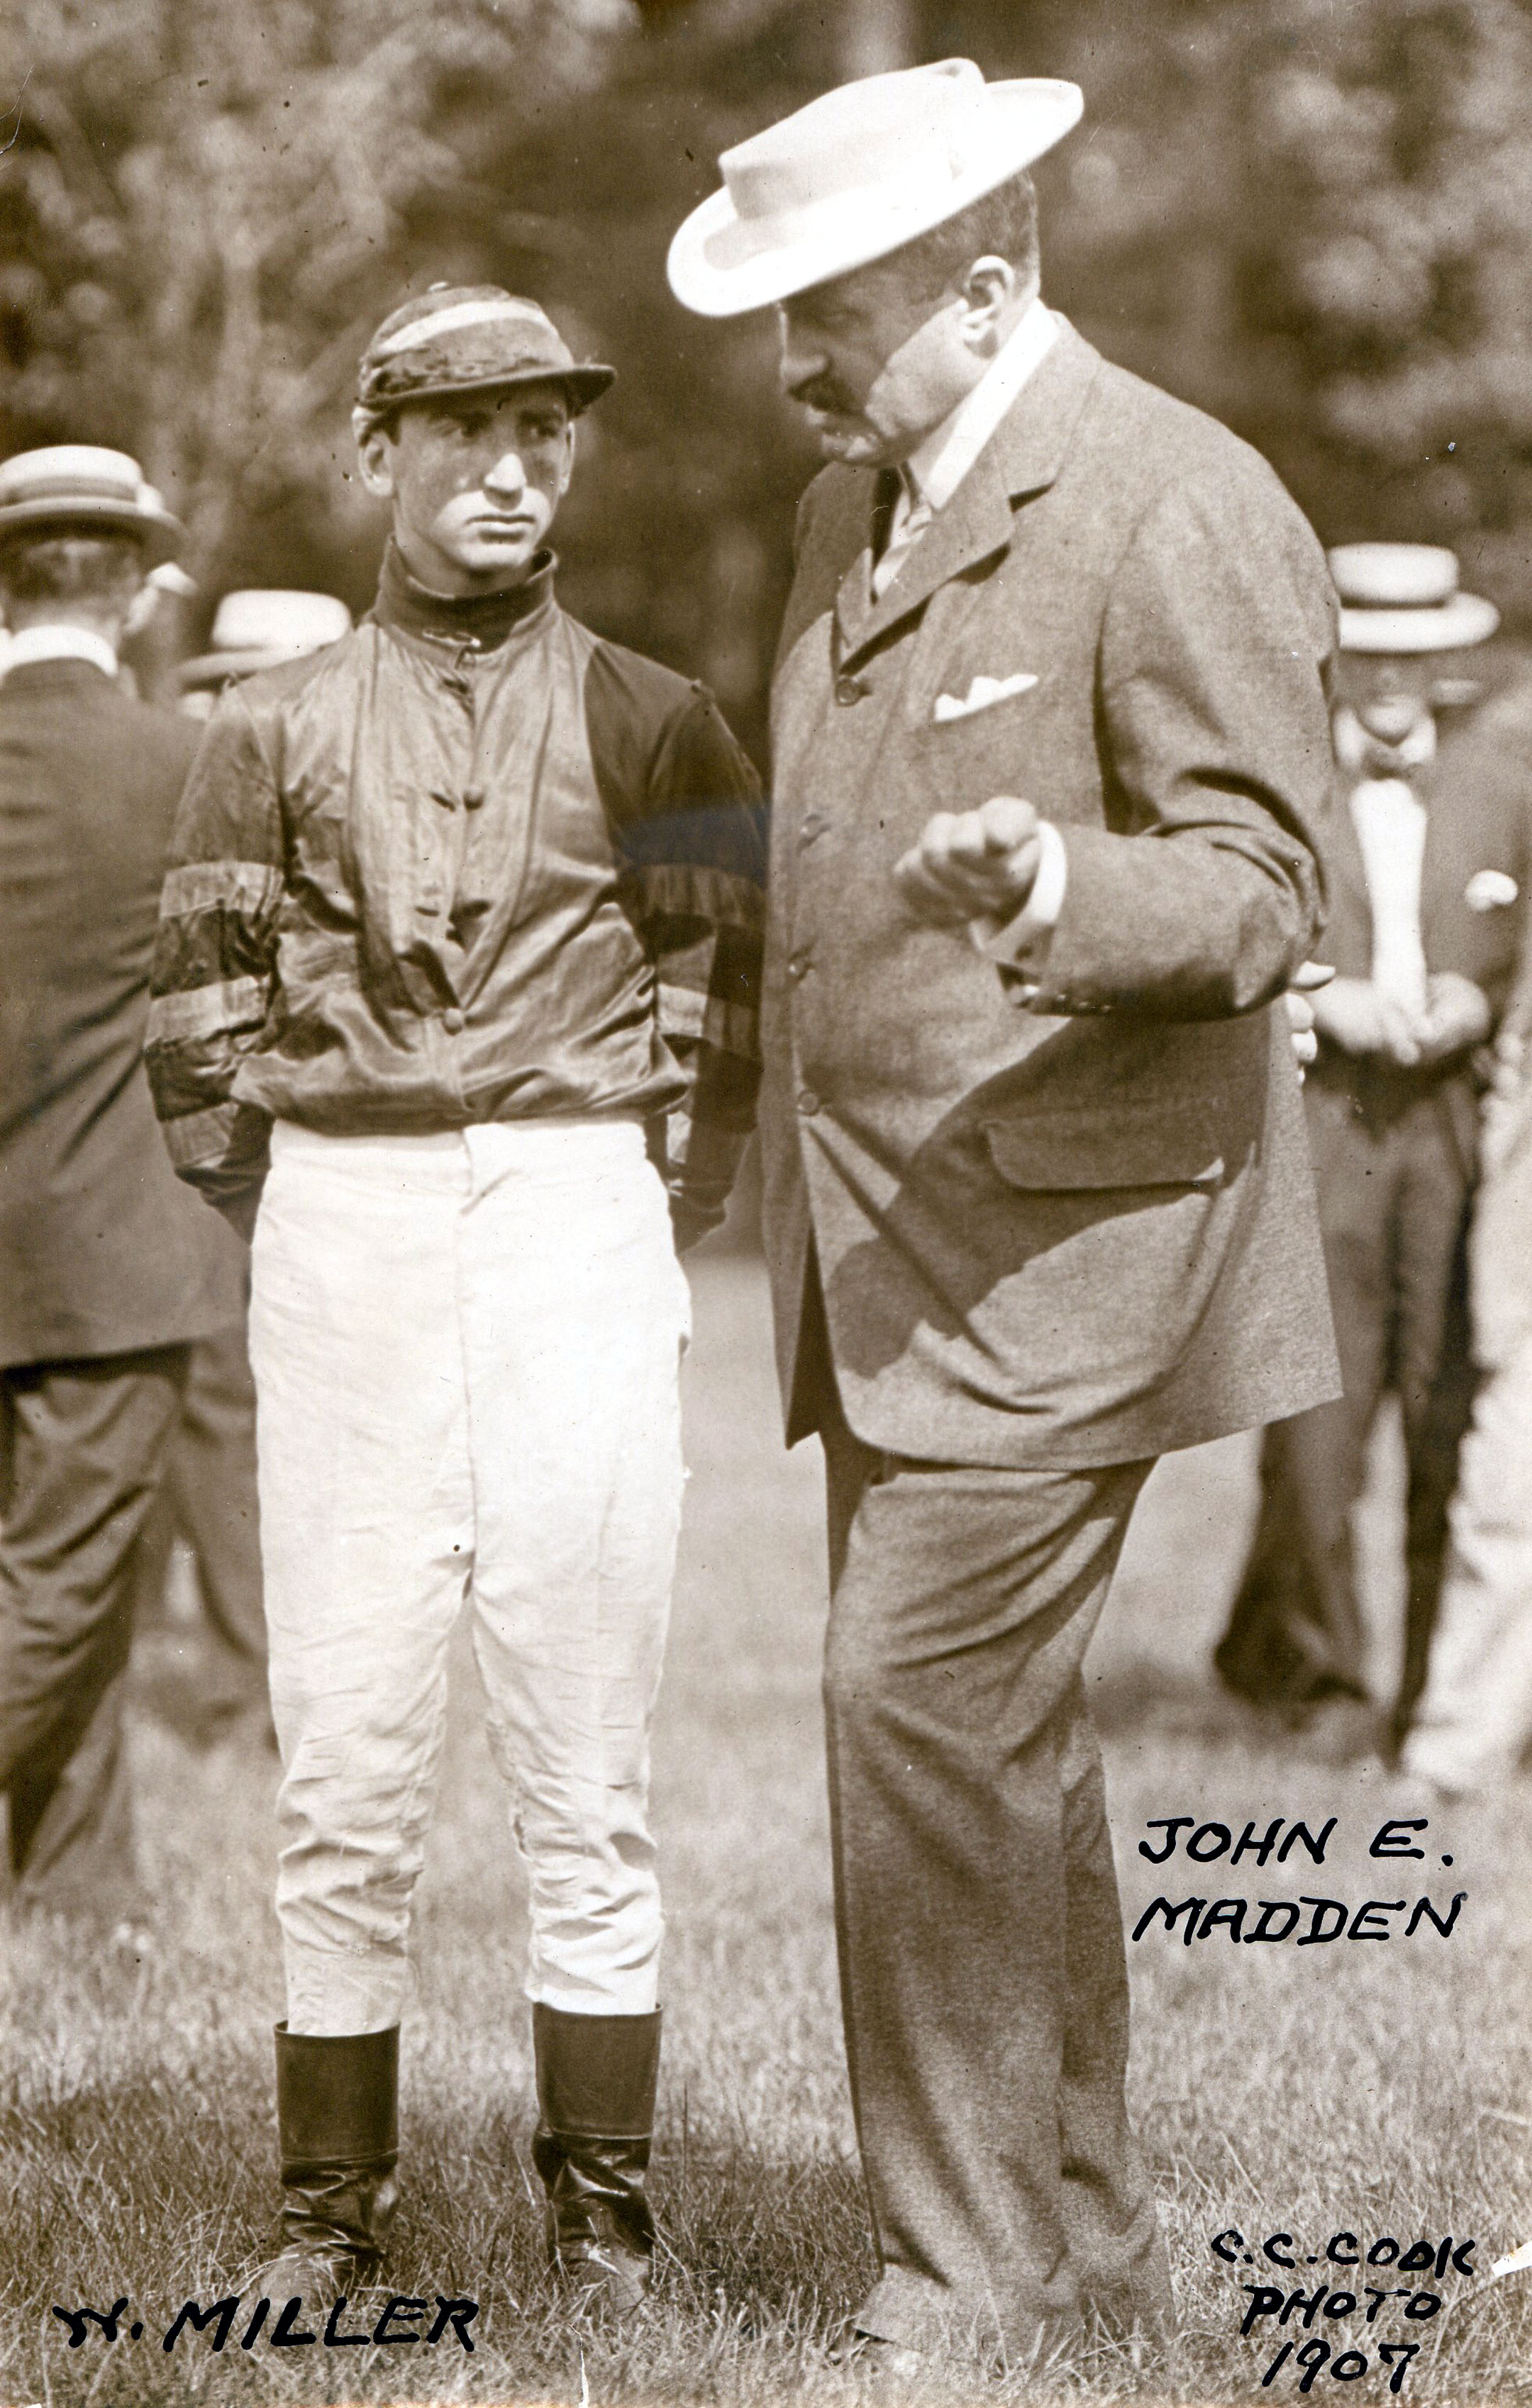 Walter Miller with trainer John E. Madden in 1907 (C. C. Cook/Museum Collection)